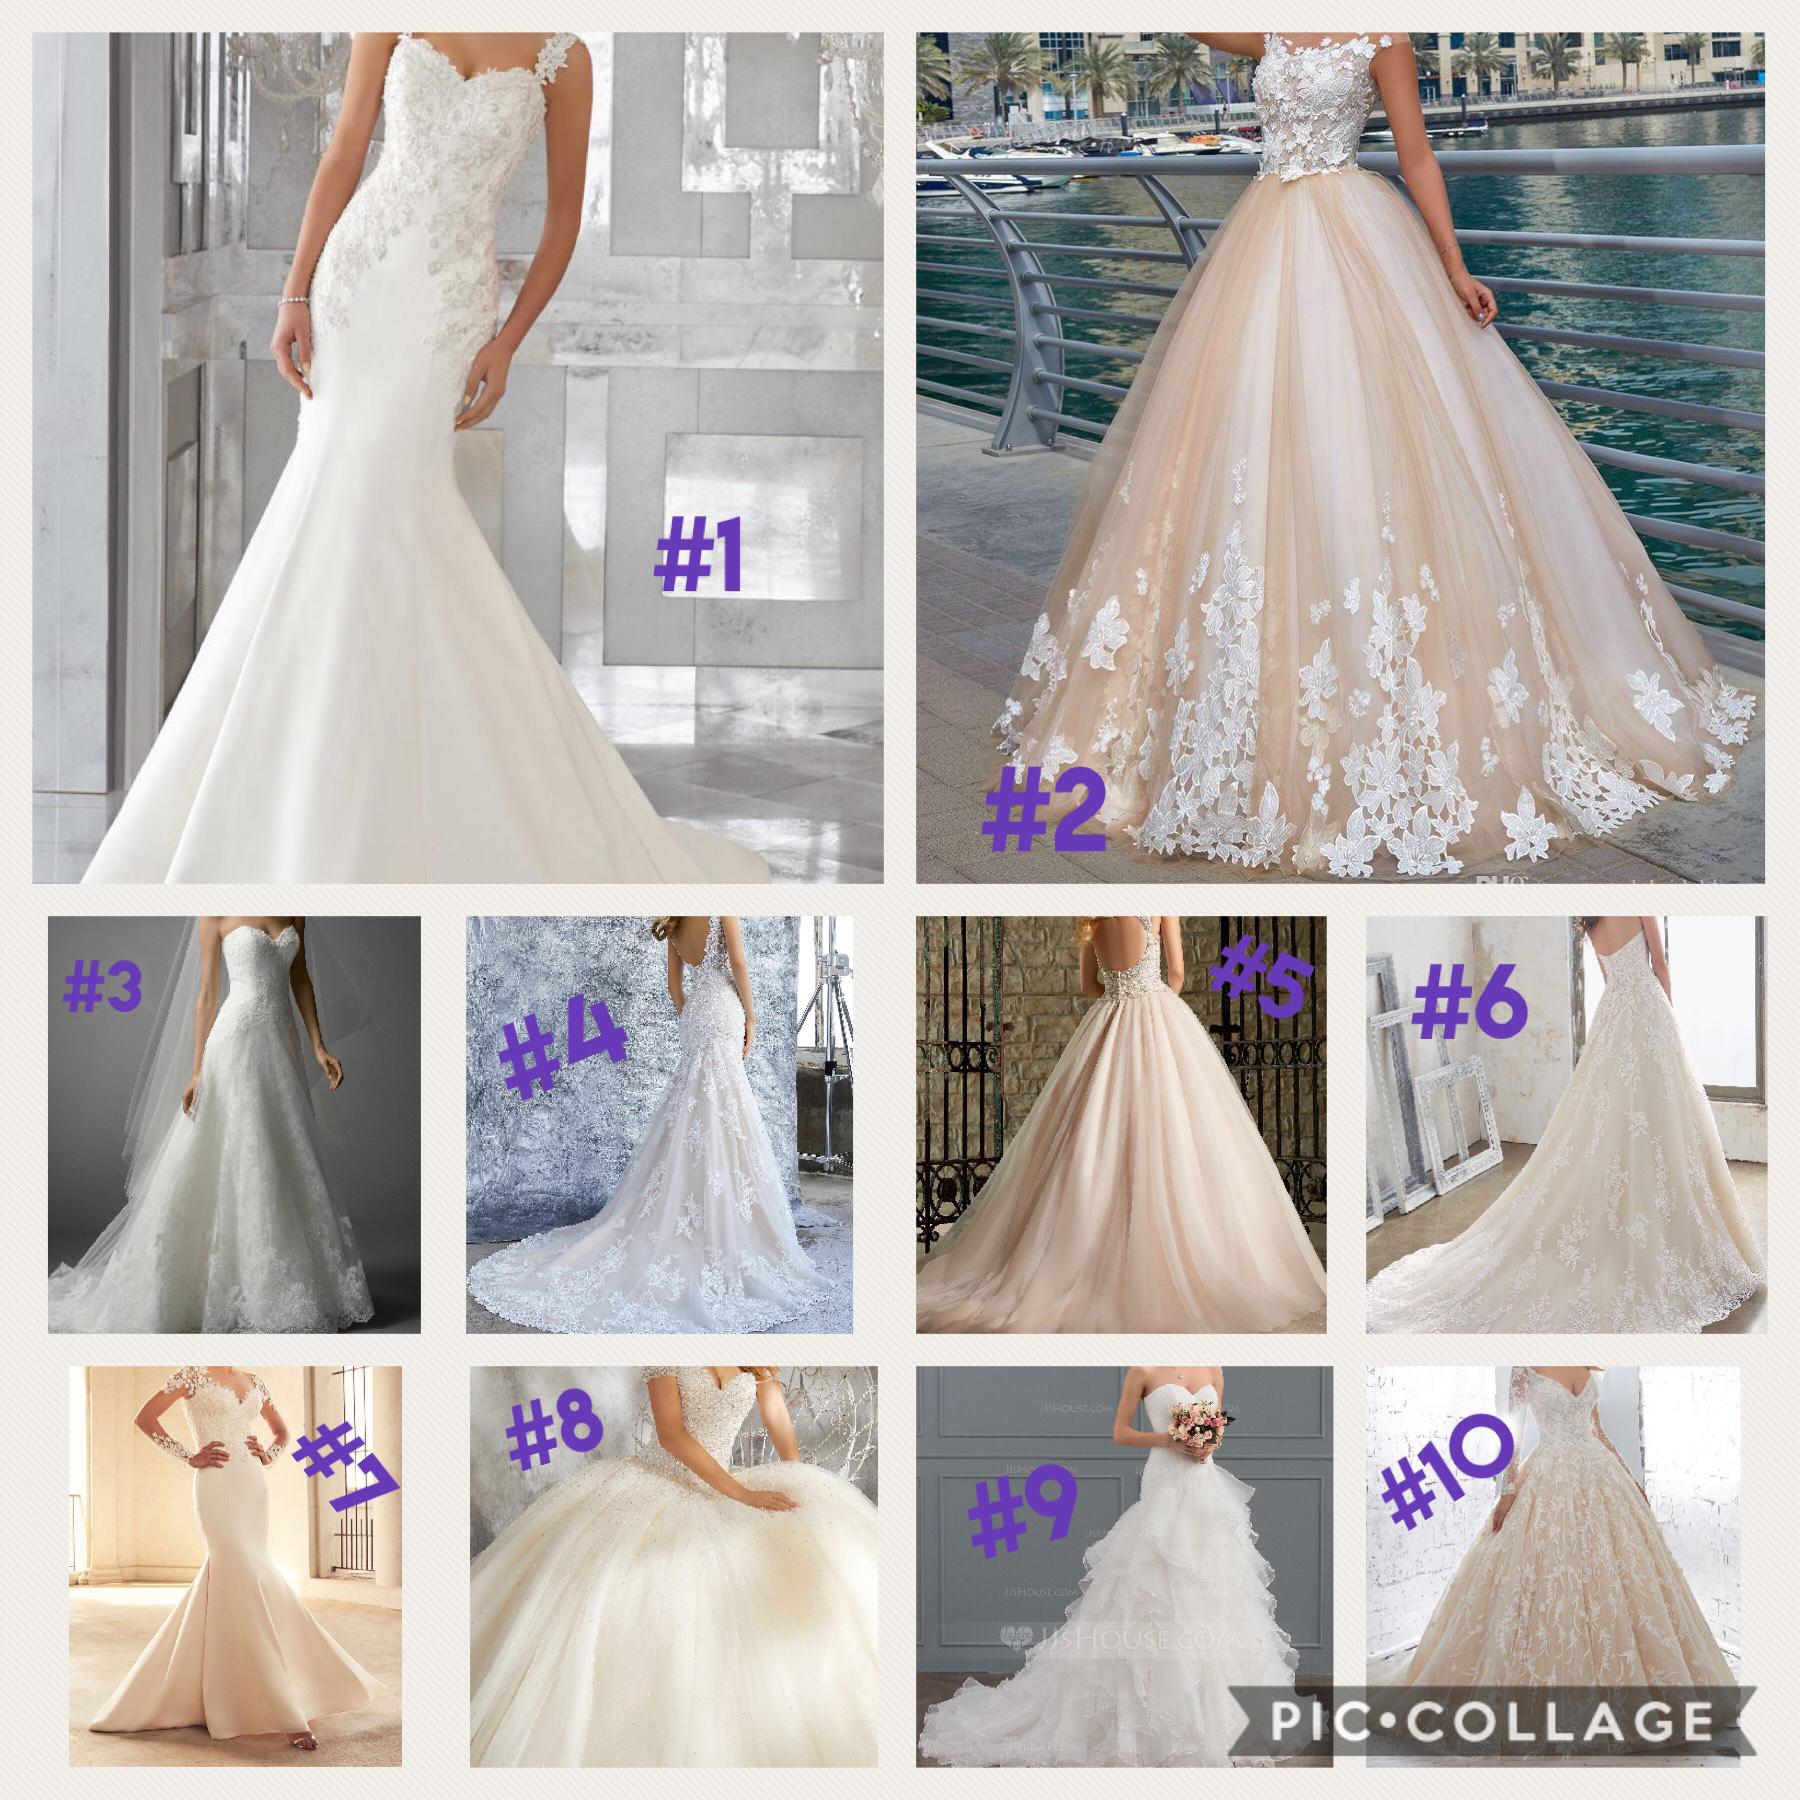 Which one would you wear on your special day?